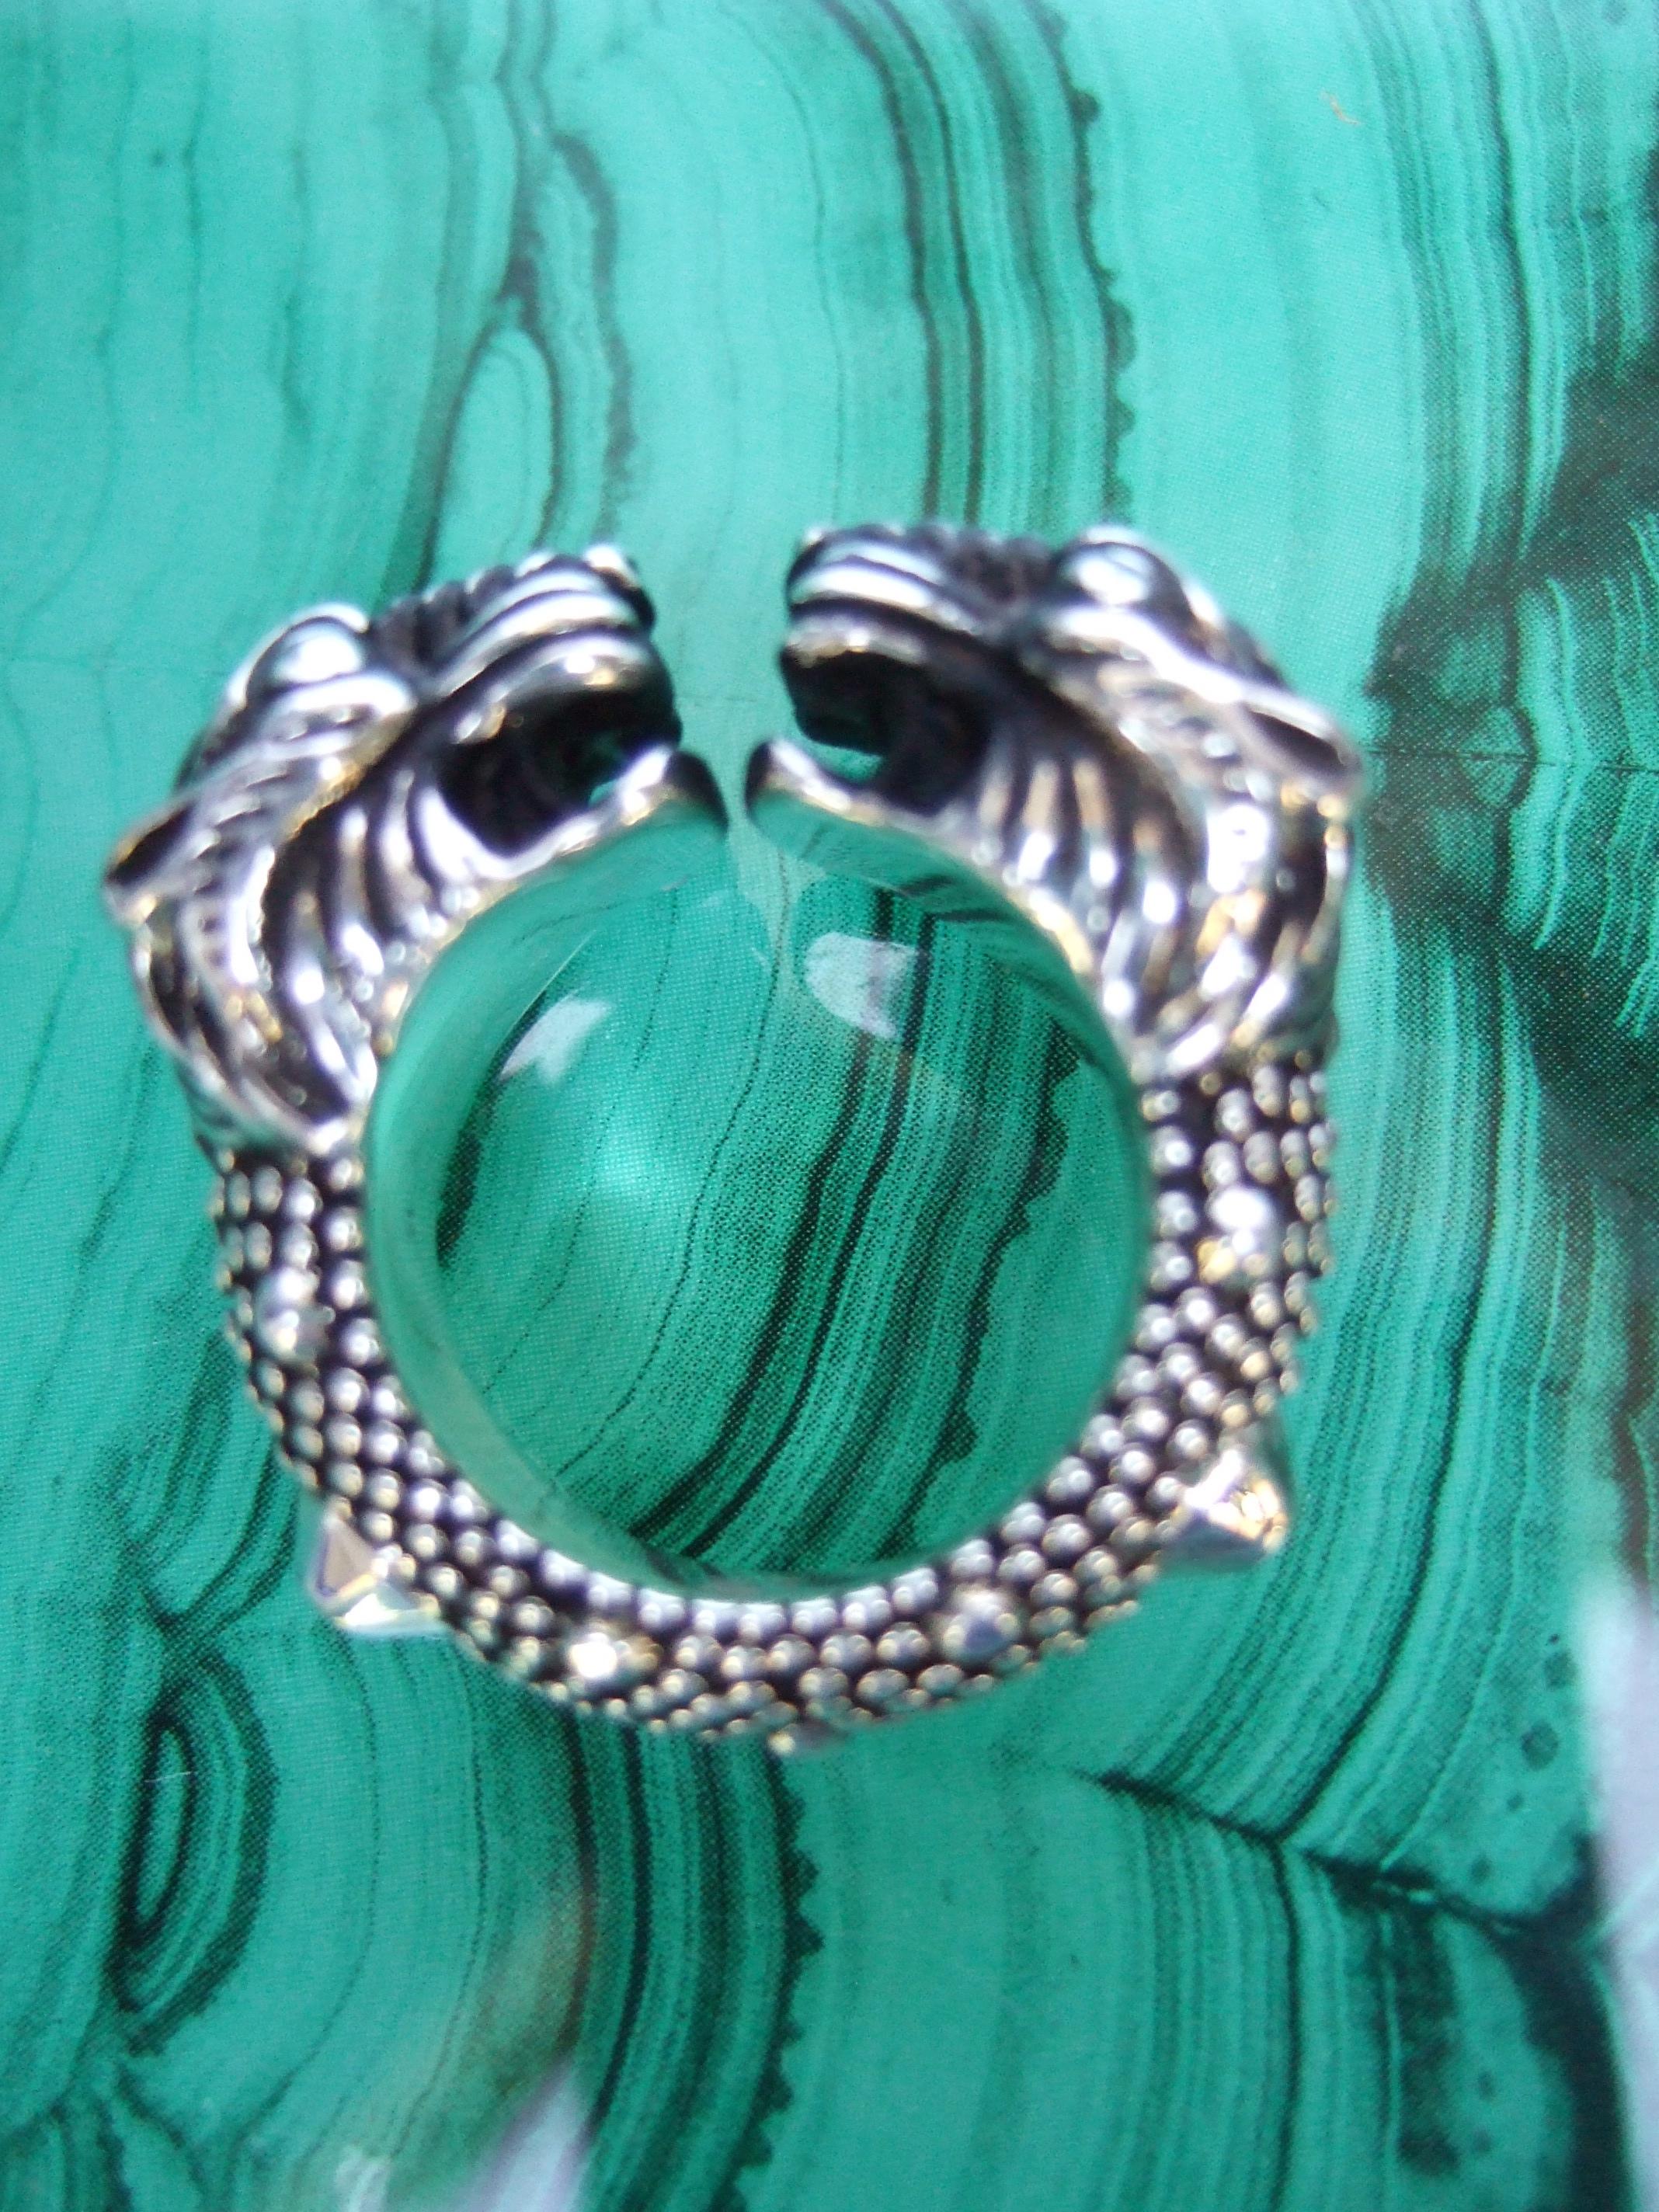 Gucci Sterling silver tiger's head ring in Gucci box Size 7 
The Italian sterling silver Gucci ring is designed with a pair of stylized
tiger's heads that converge at the center with a small gap opening 

The sterling silver has grooved and